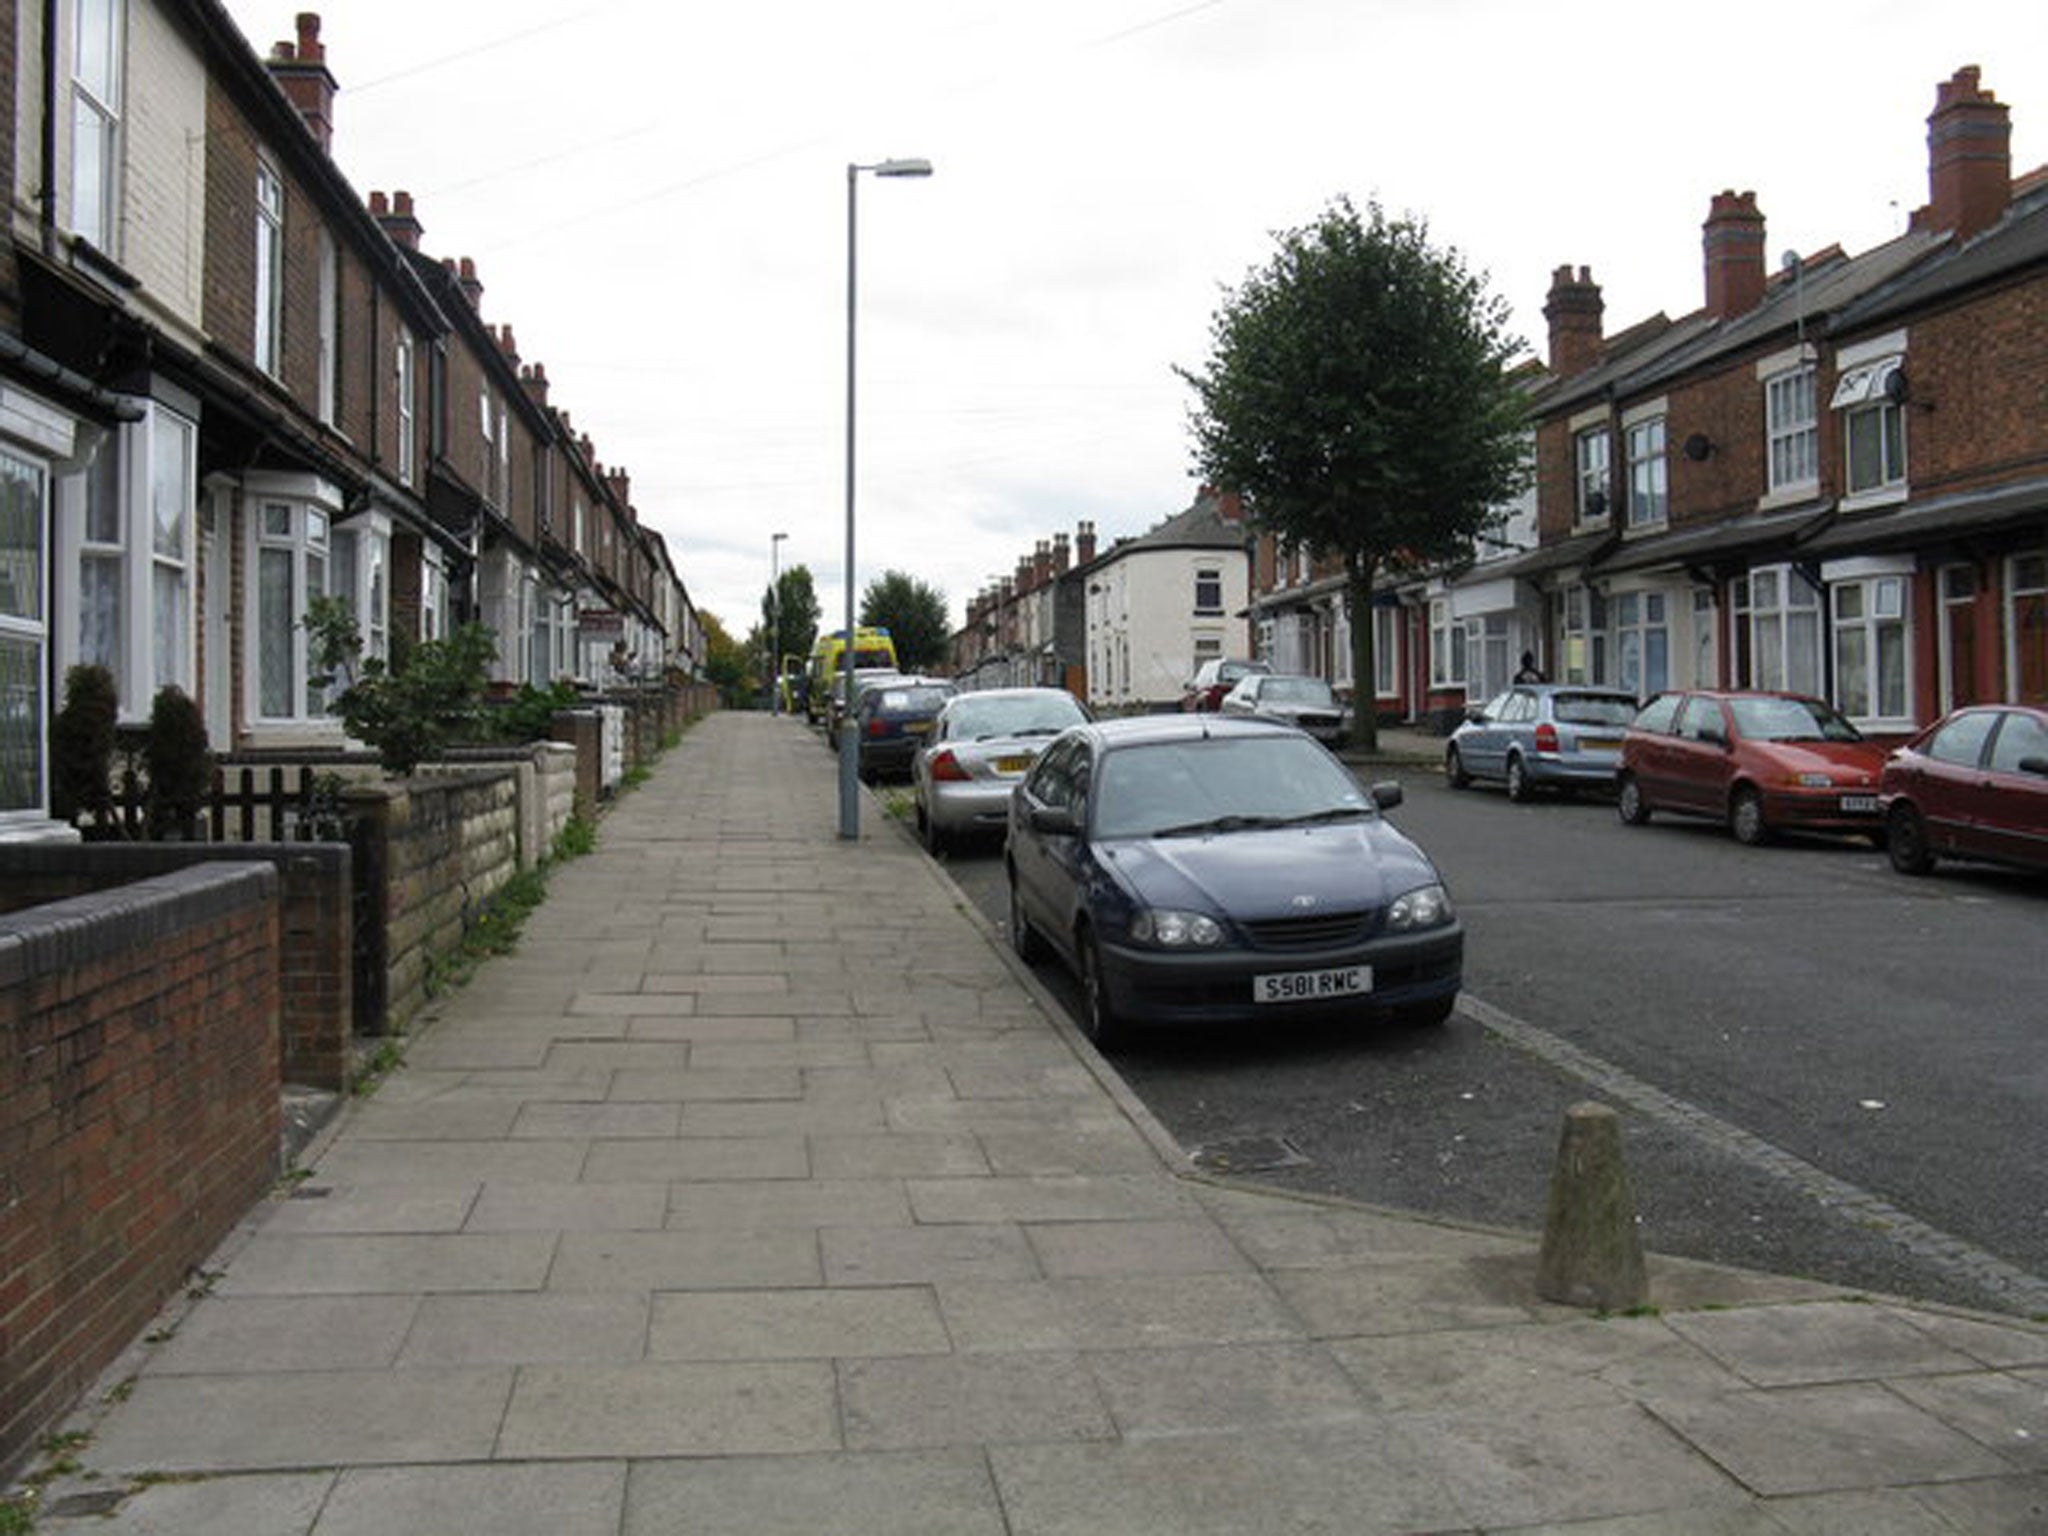 James Turner Street in Birmingham, from where the sign was stolen